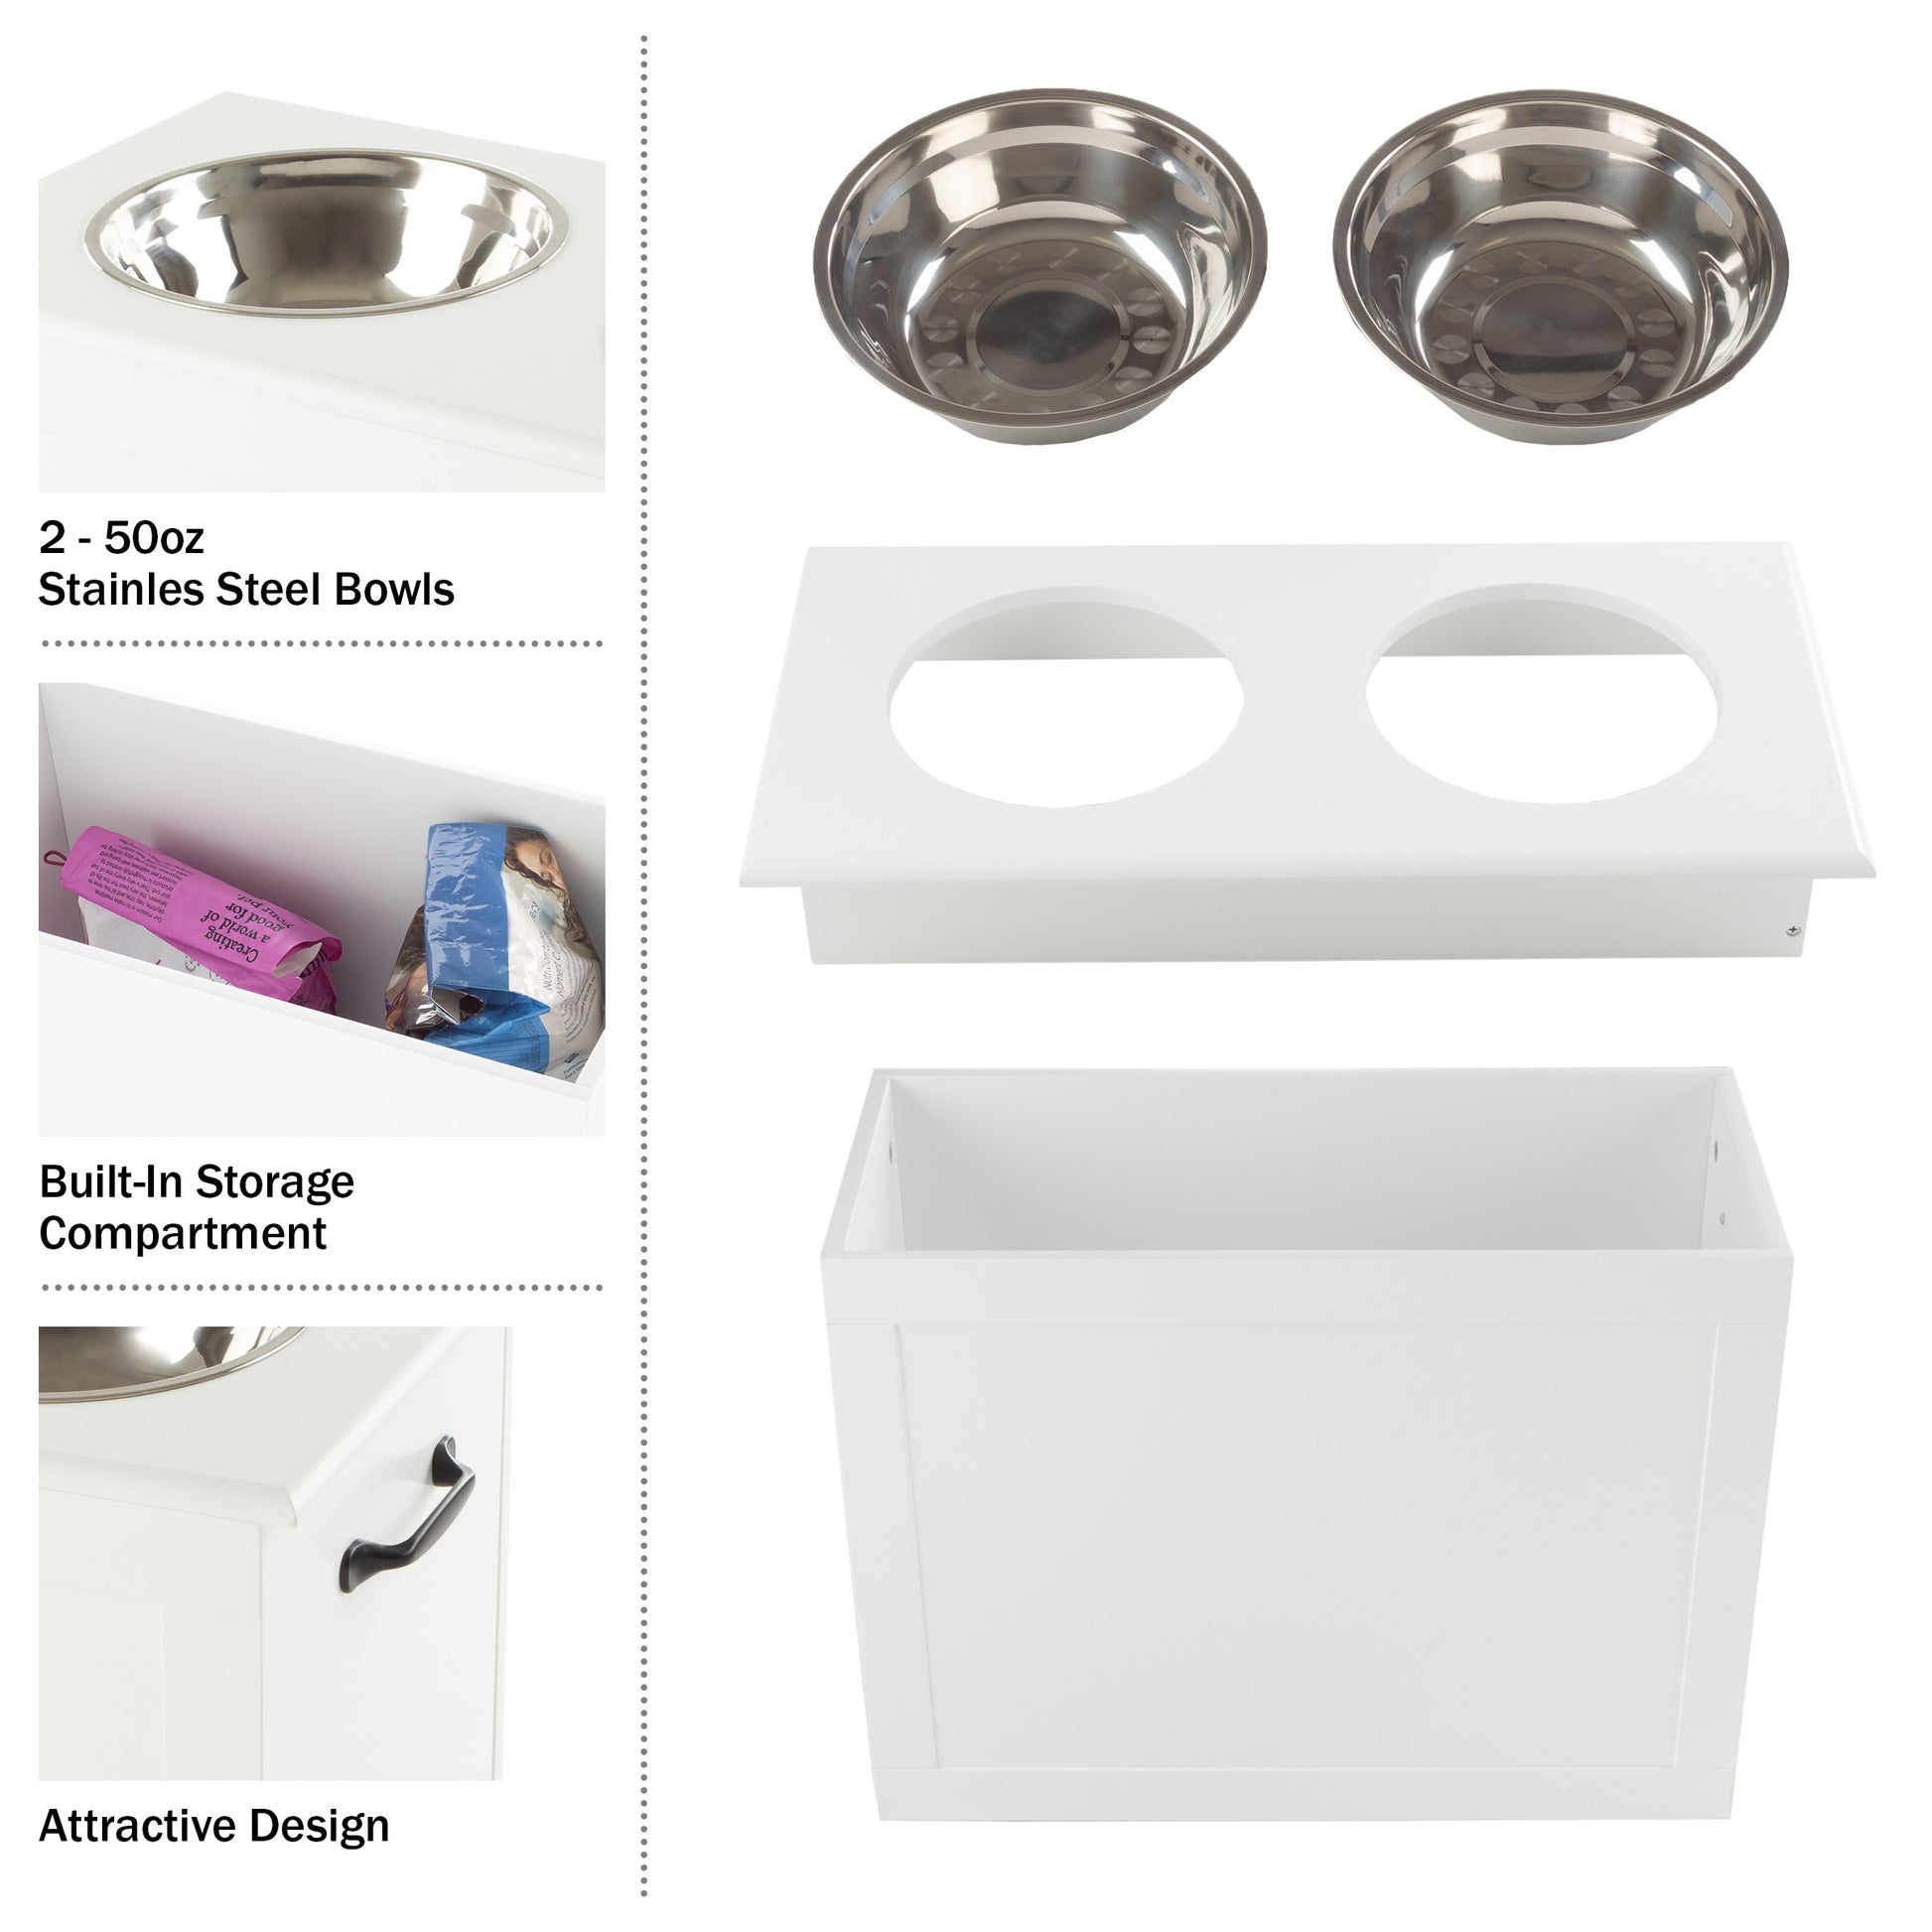 Petmaker 40 oz. Stainless Steel Elevated Pet Bowls with 6.5 in